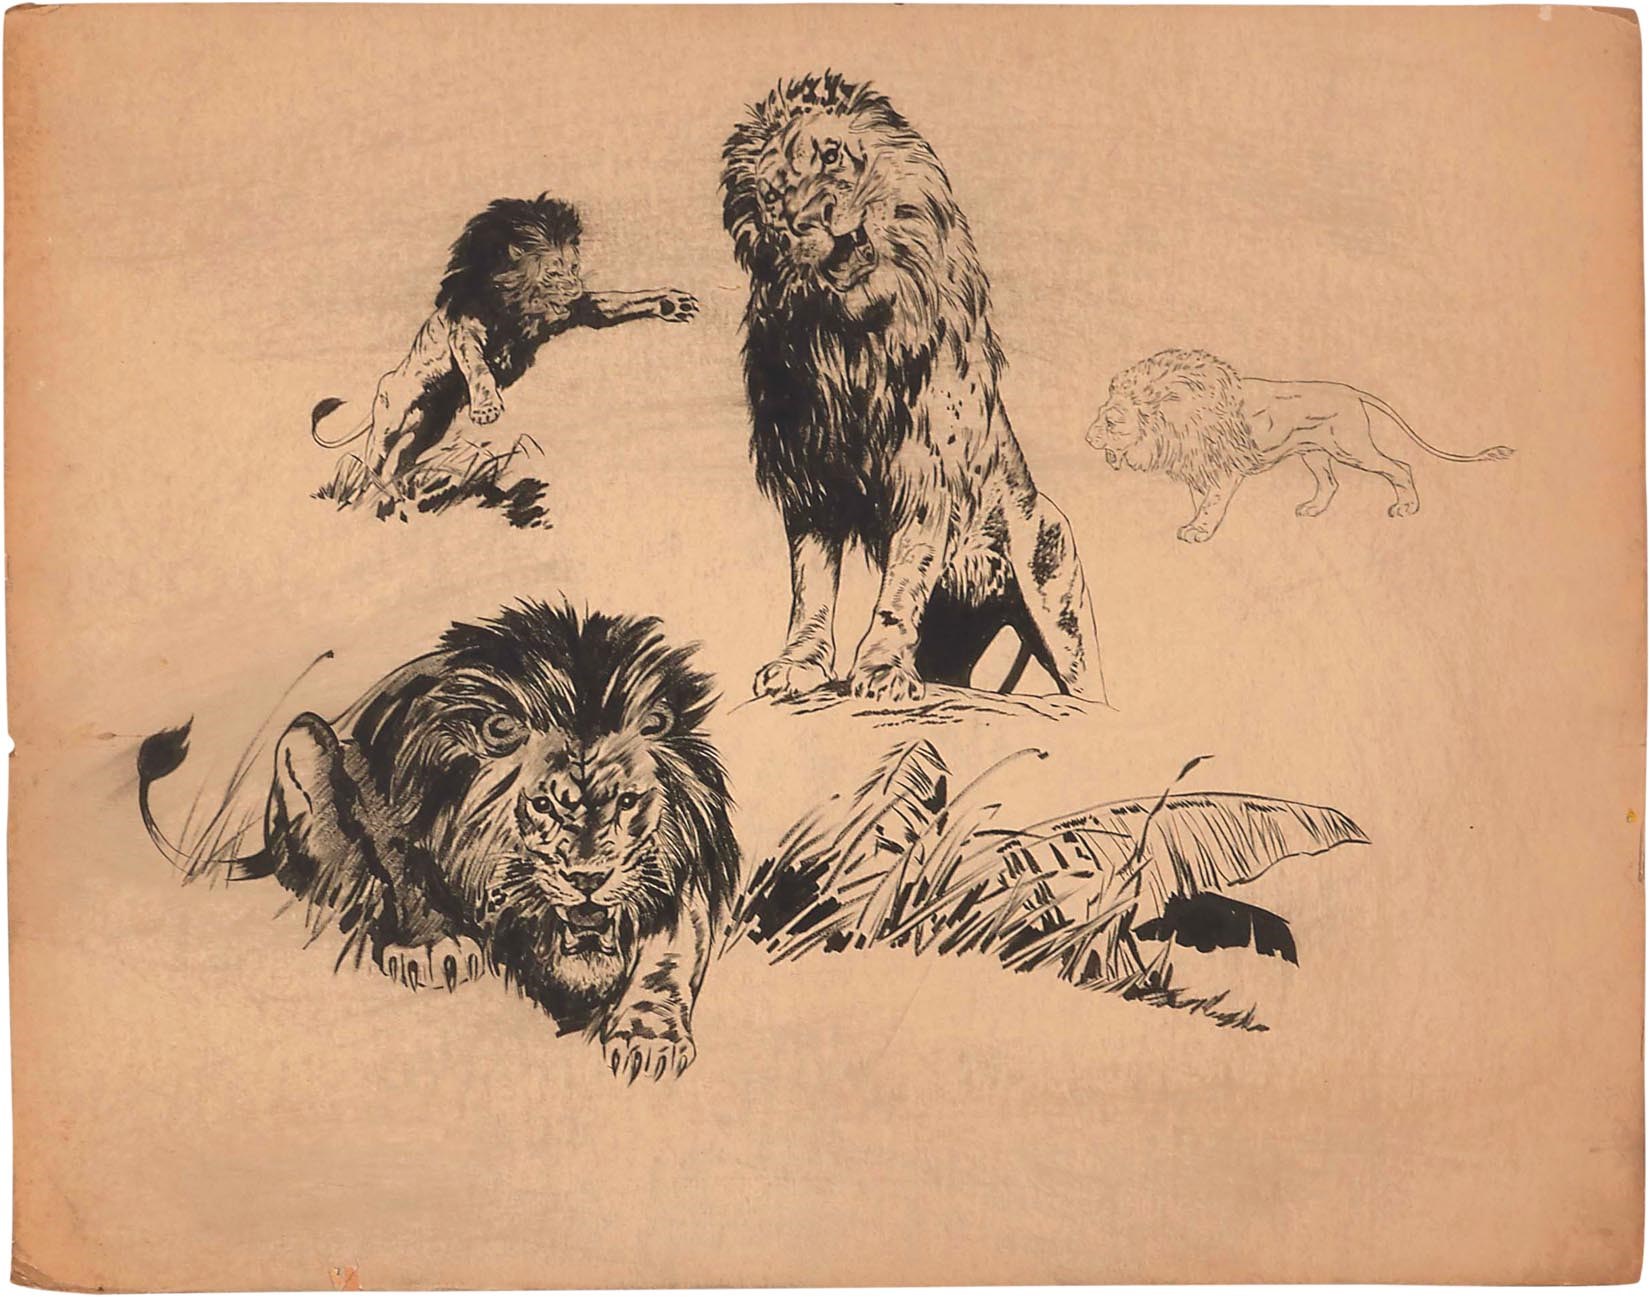 - Early 1930s Tarzan "Lion" Character Study Guide by Hal Foster